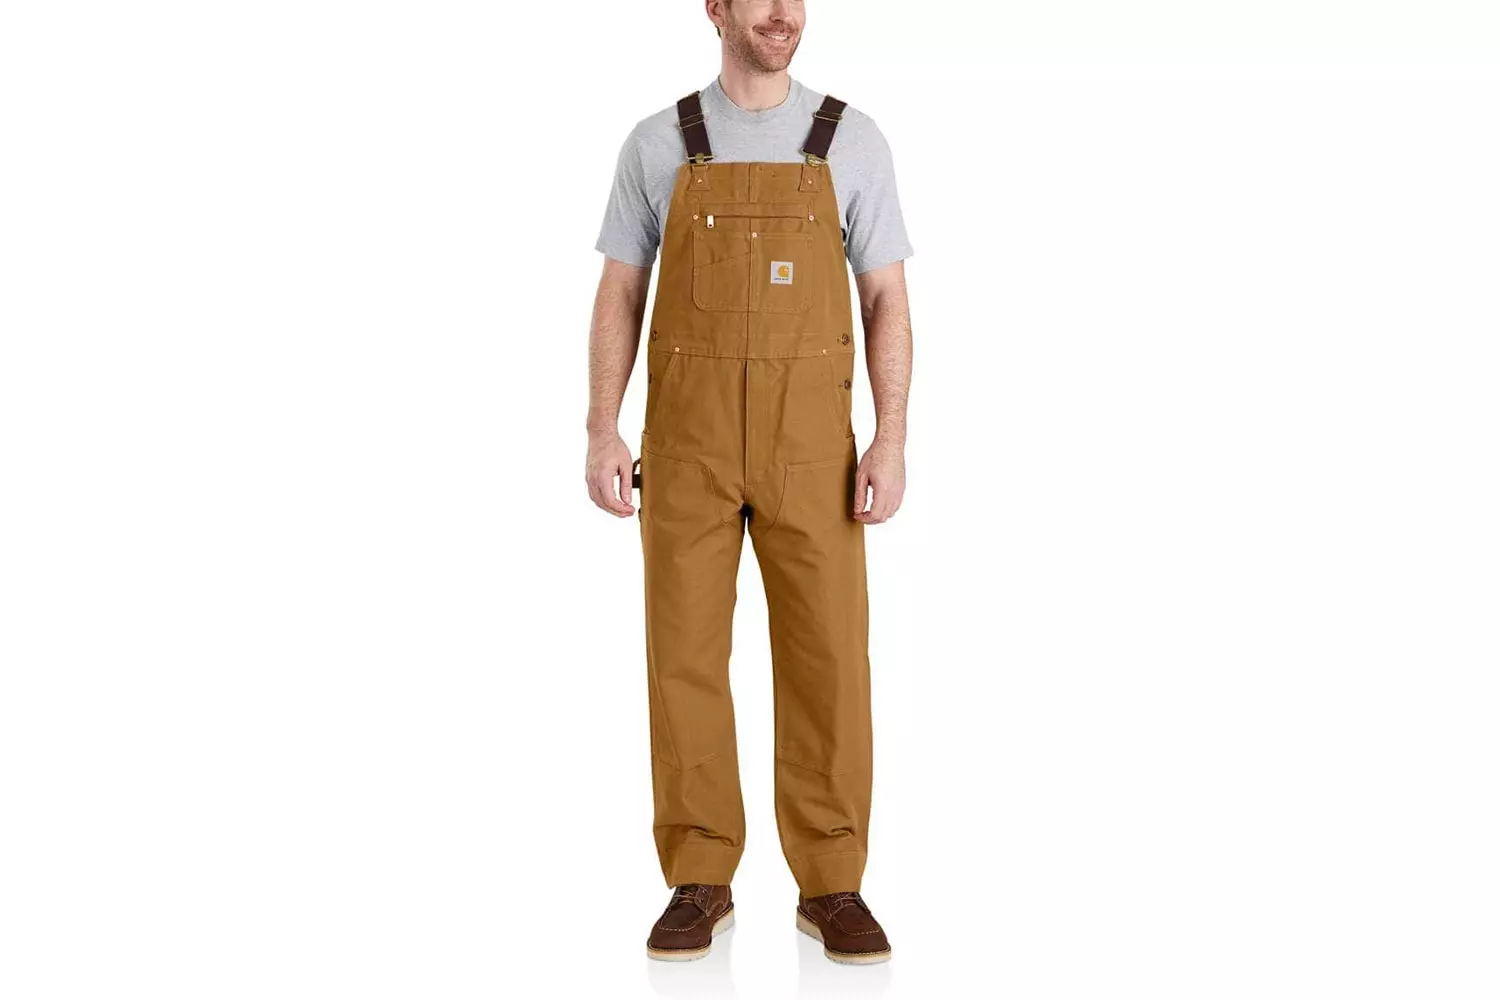 Forever 21 Slim-Fit Utility Overalls